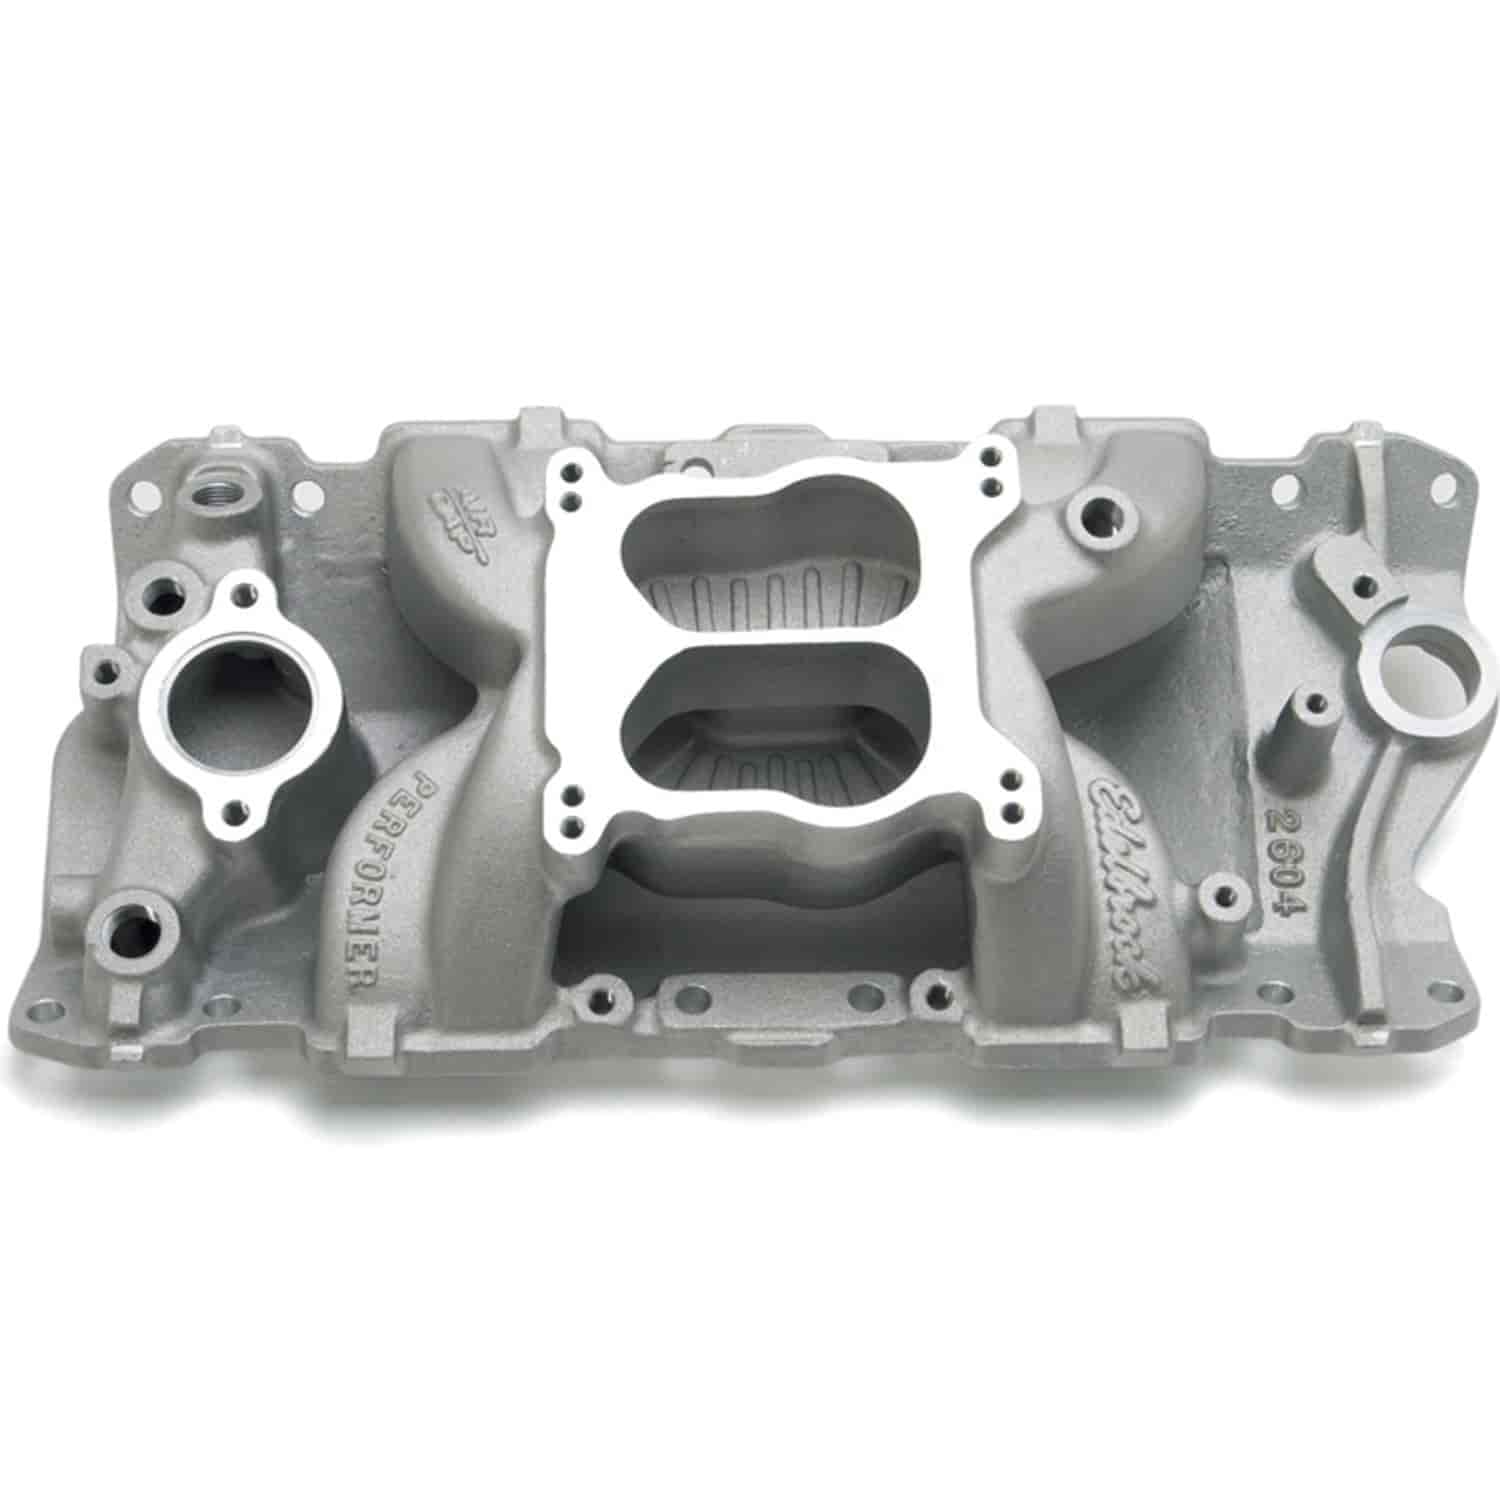 Performer Air-Gap Intake Manifold for Small Block Chevy with 1987-95 Cast Iron Heads